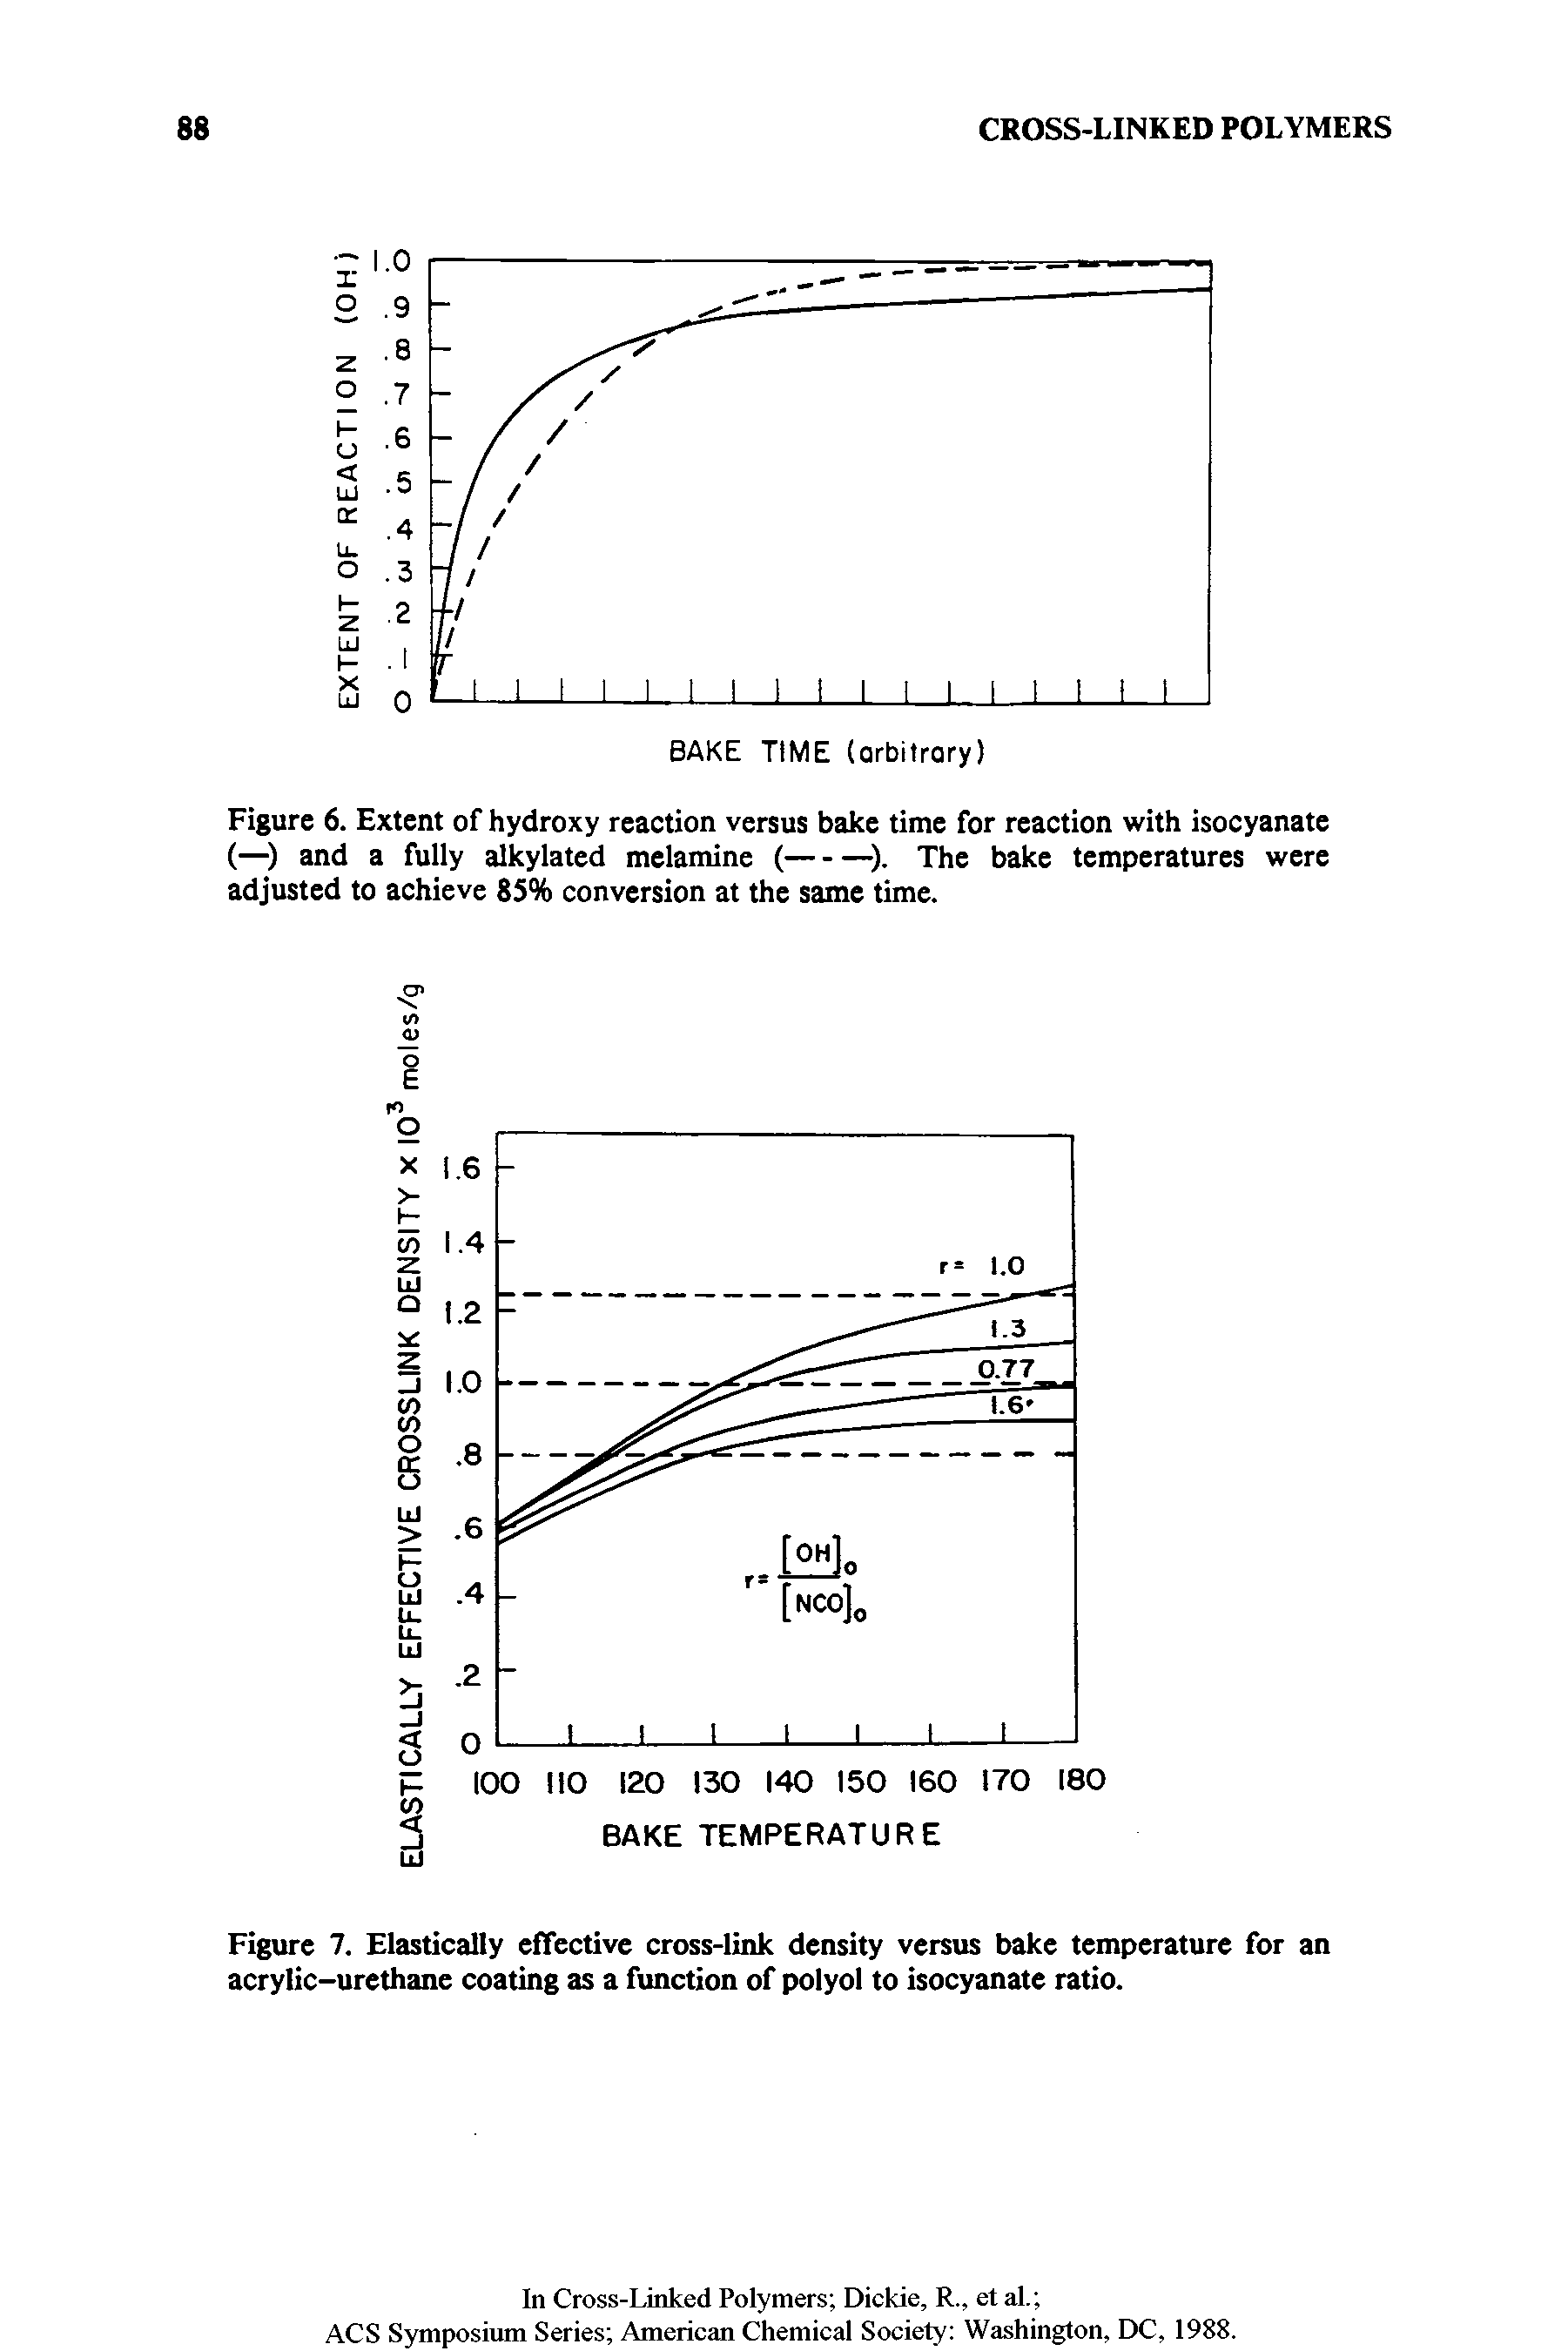 Figure 6. Extent of hydroxy reaction versus bake time for reaction with isocyanate...